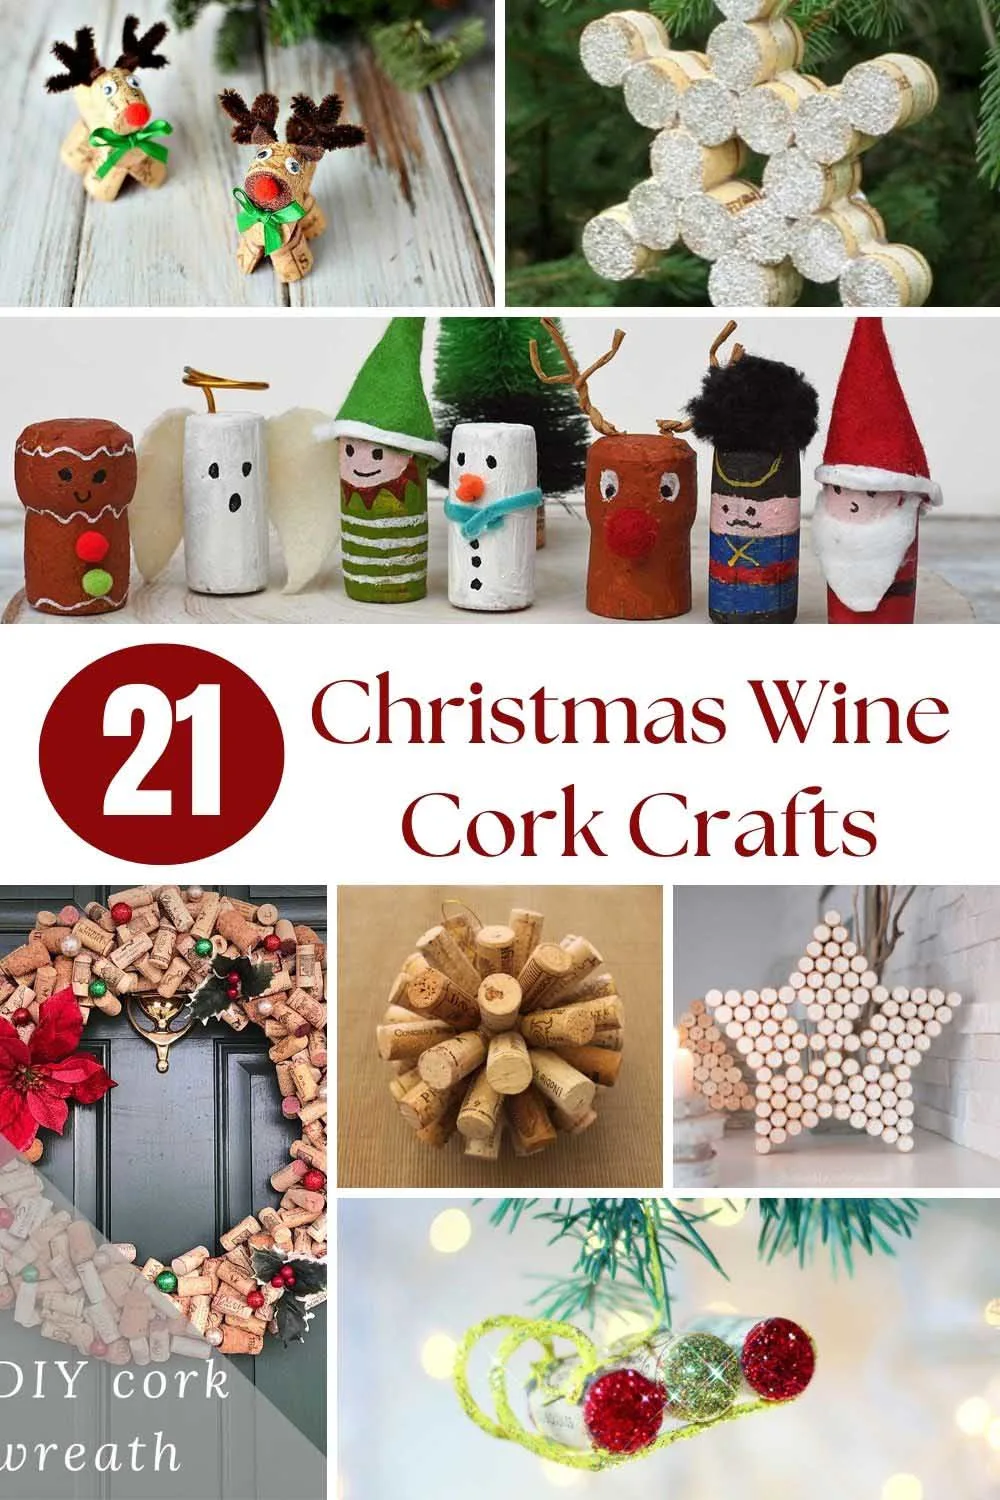 23 Christmas Wine Cork Crafts That Will